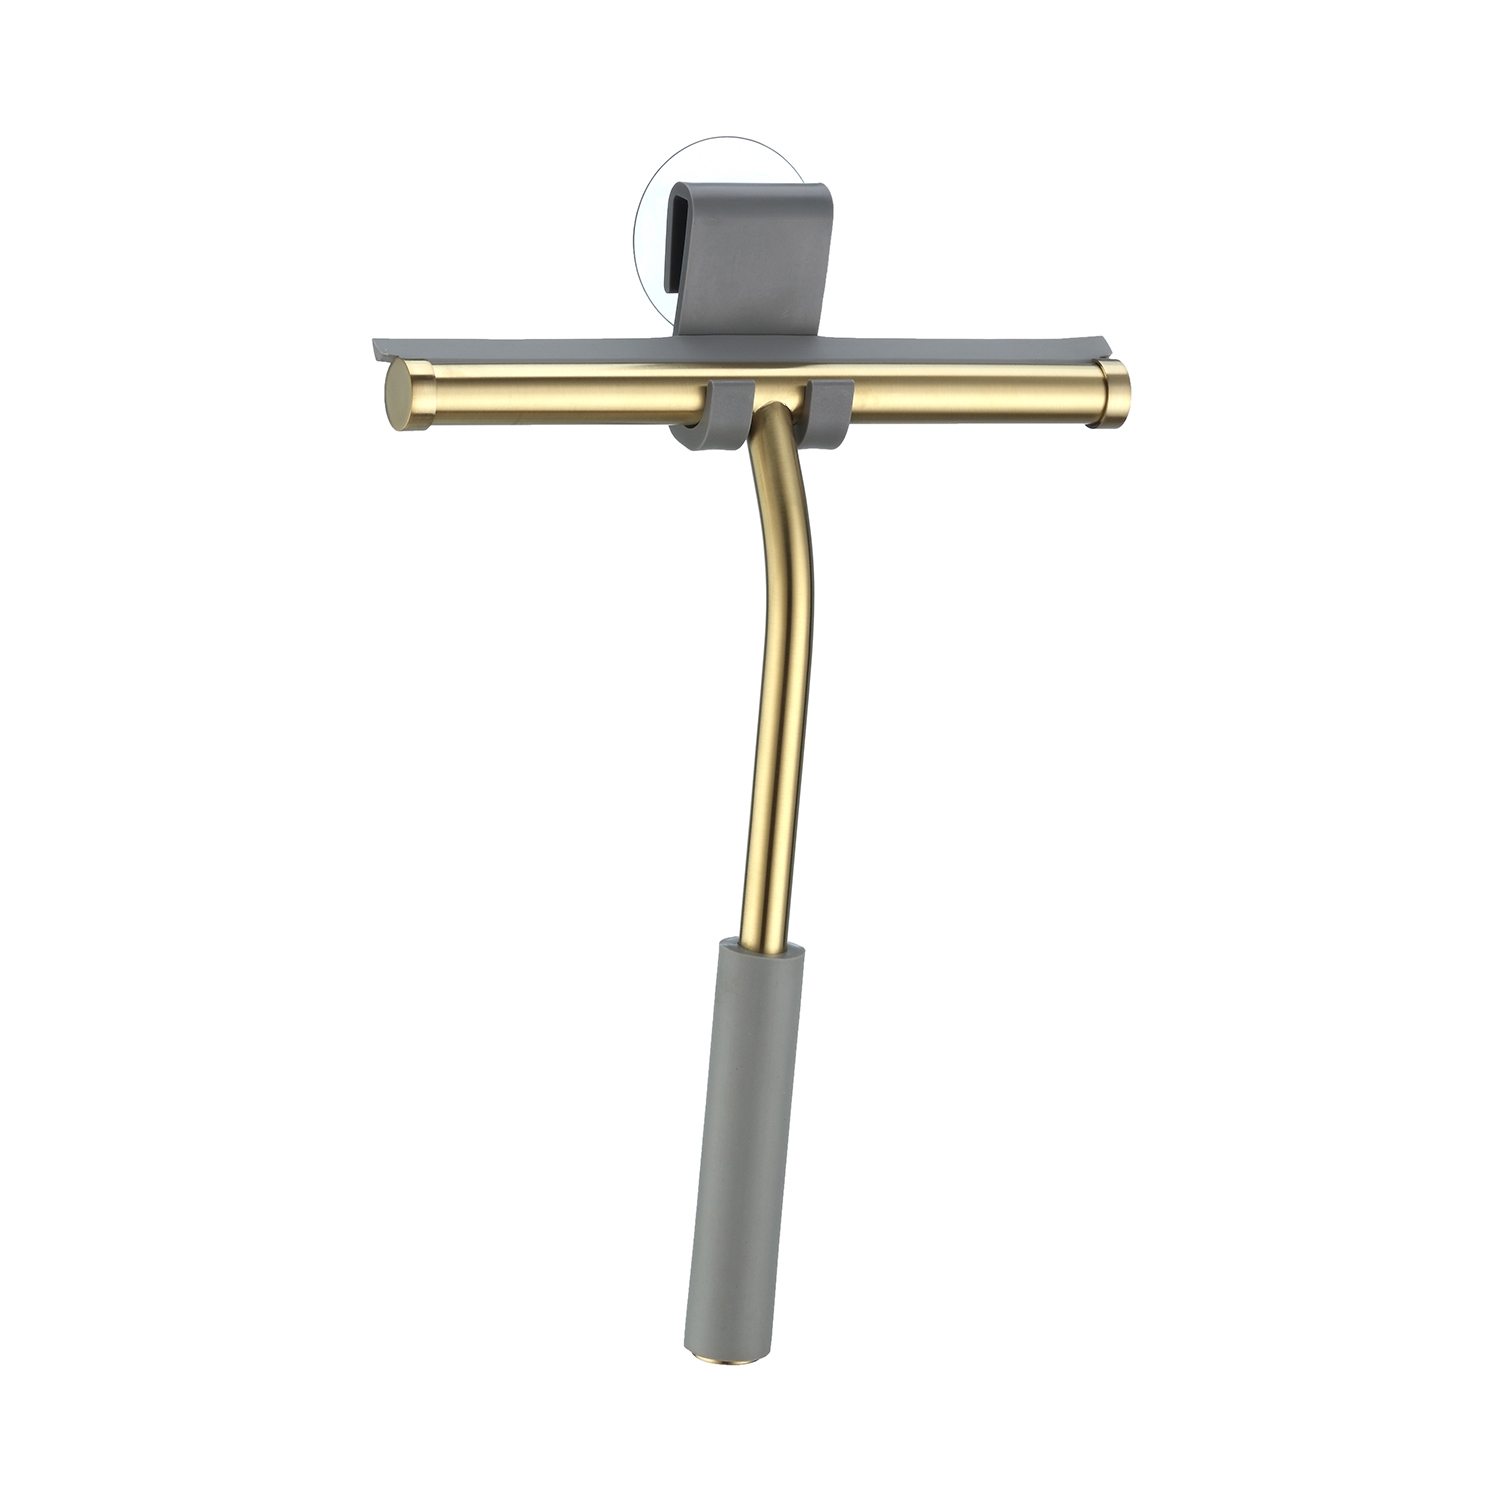 K-211BRUSHED GOLD Shower squeegee											